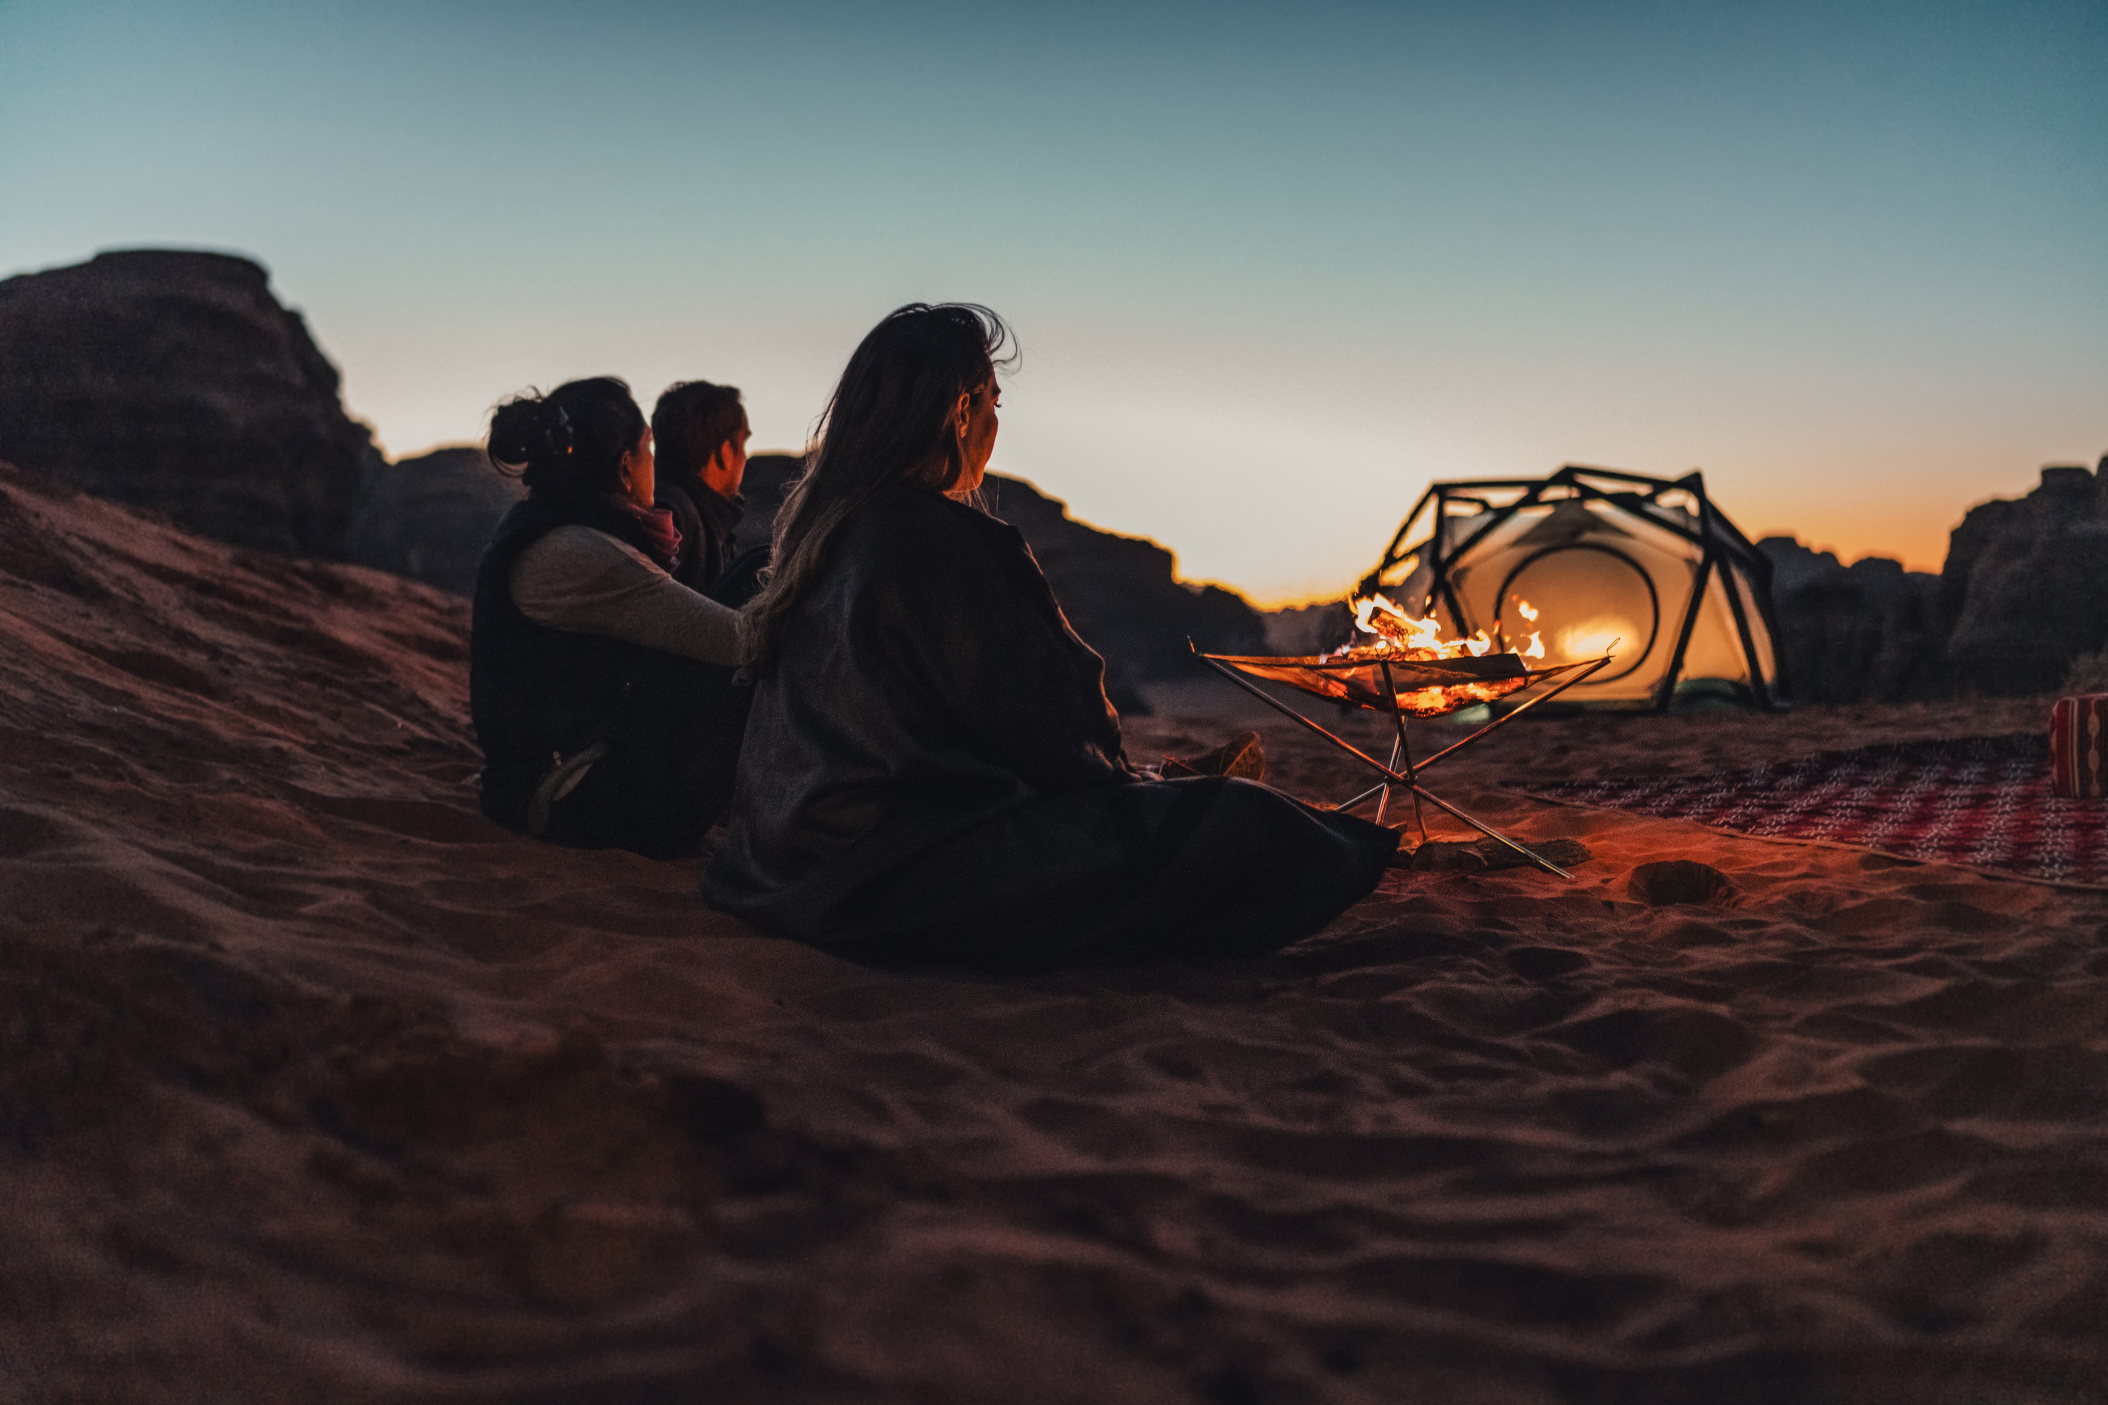 NEOM, SAUDI ARABIA – DECEMBER 10: Friends watching their fireplace next to a tent in Hisma Desert during sunset on December 10, 2022, in NEOM, Saudi Arabia.